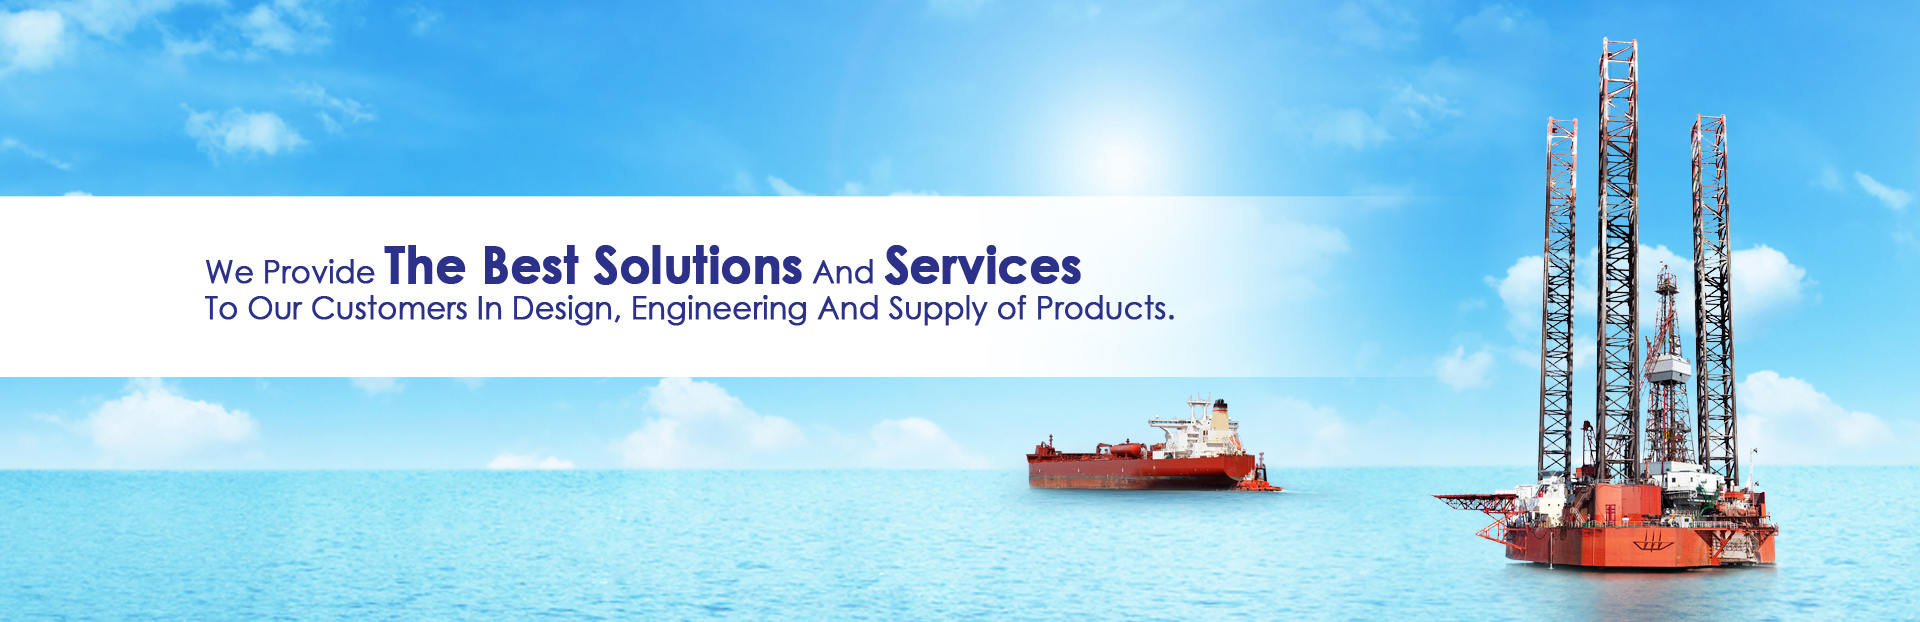 We Provide The Best Solutions And Services 
To Our Customers In Design, Engineering And Supply of Products